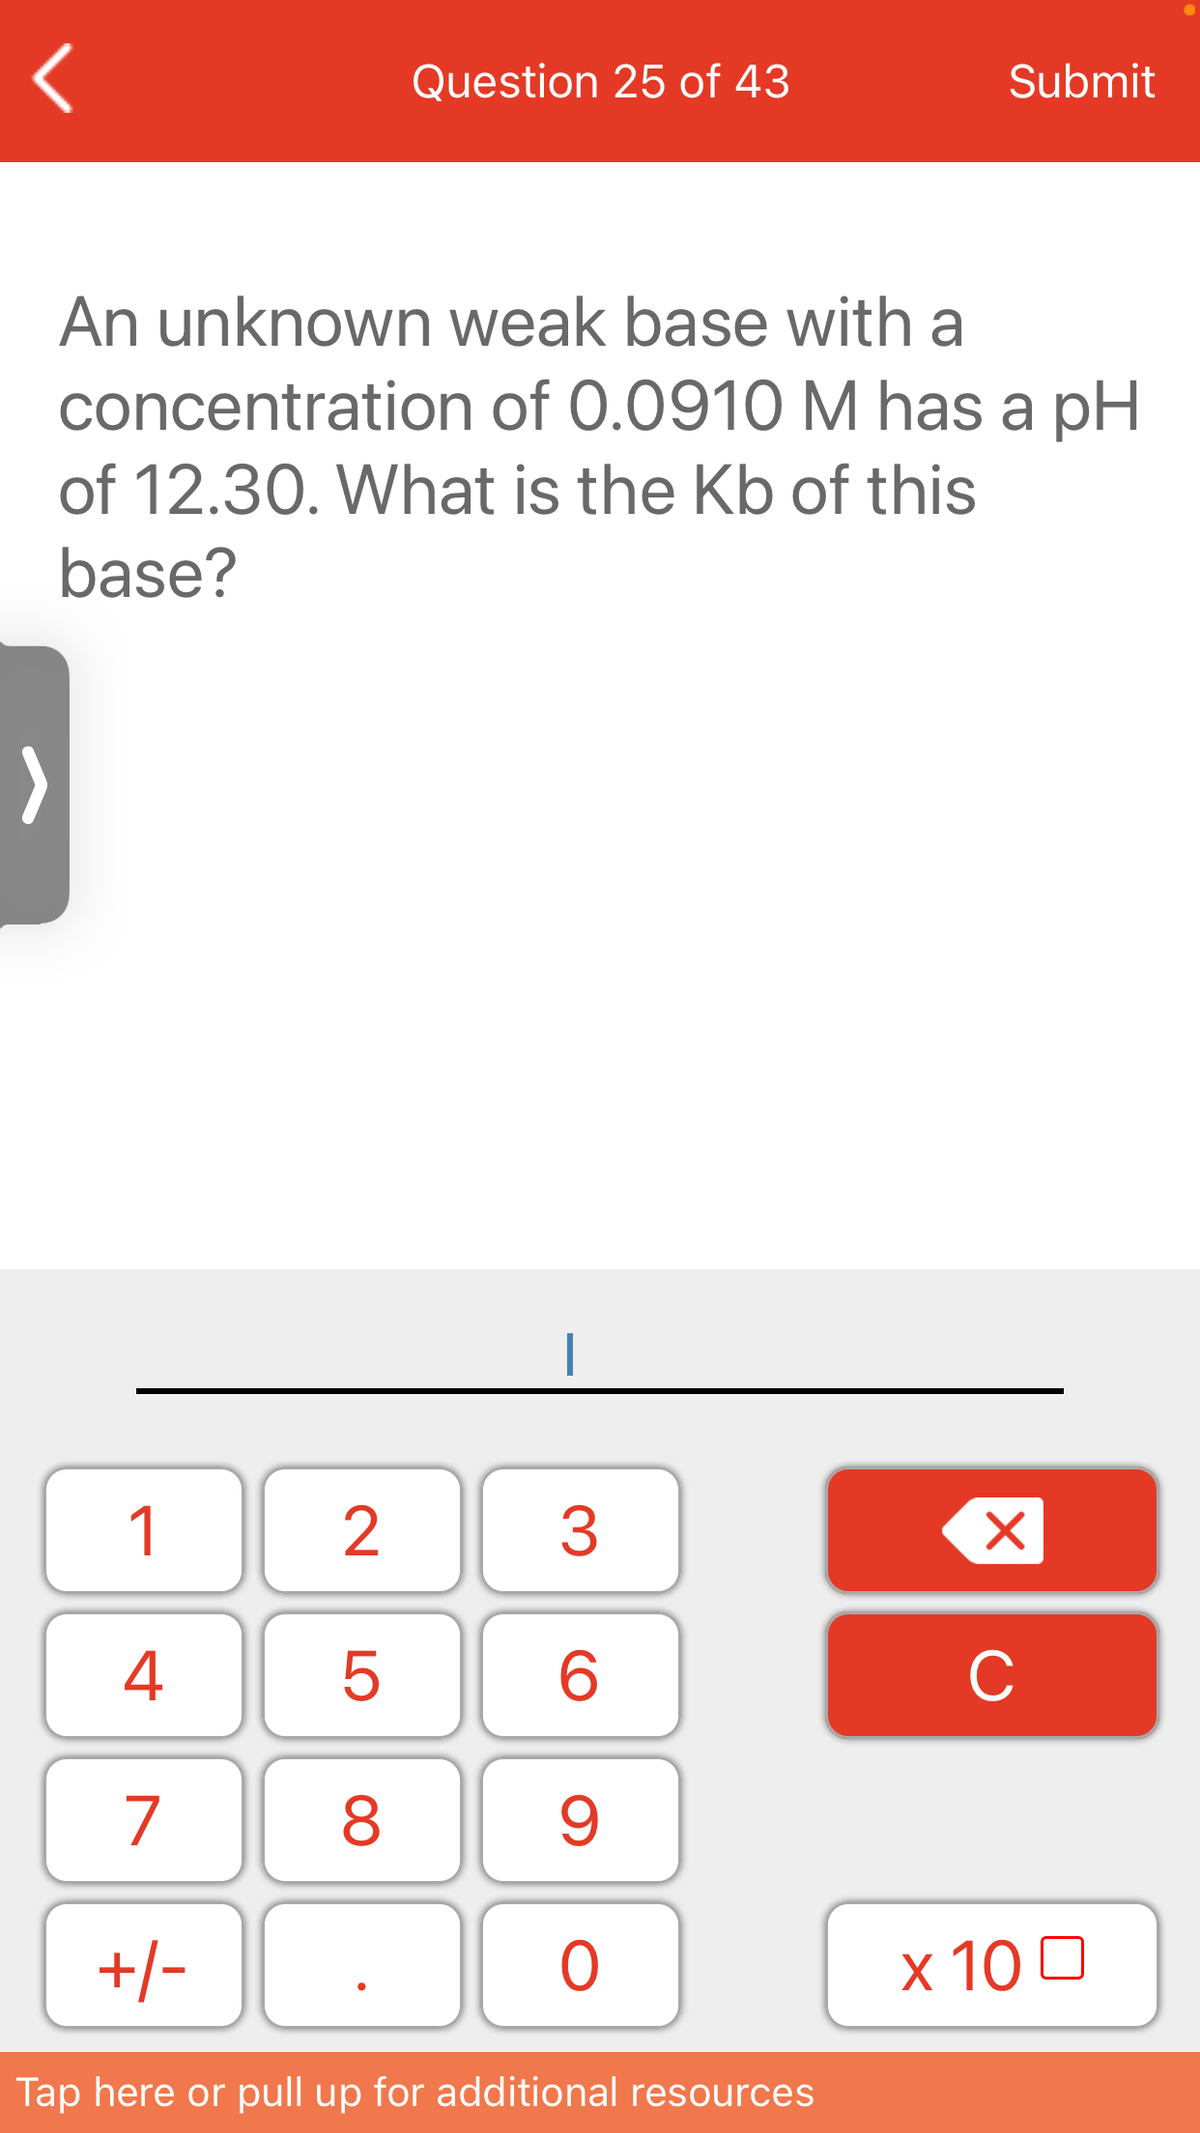 Question 25 of 43
Submit
An unknown weak base with a
concentration of 0.0910 M has a pH
of 12.30. What is the Kb of this
base?
1
3
4
C
7
8
+/-
x 10 0
Tap here or pull up for additional resources
LO
